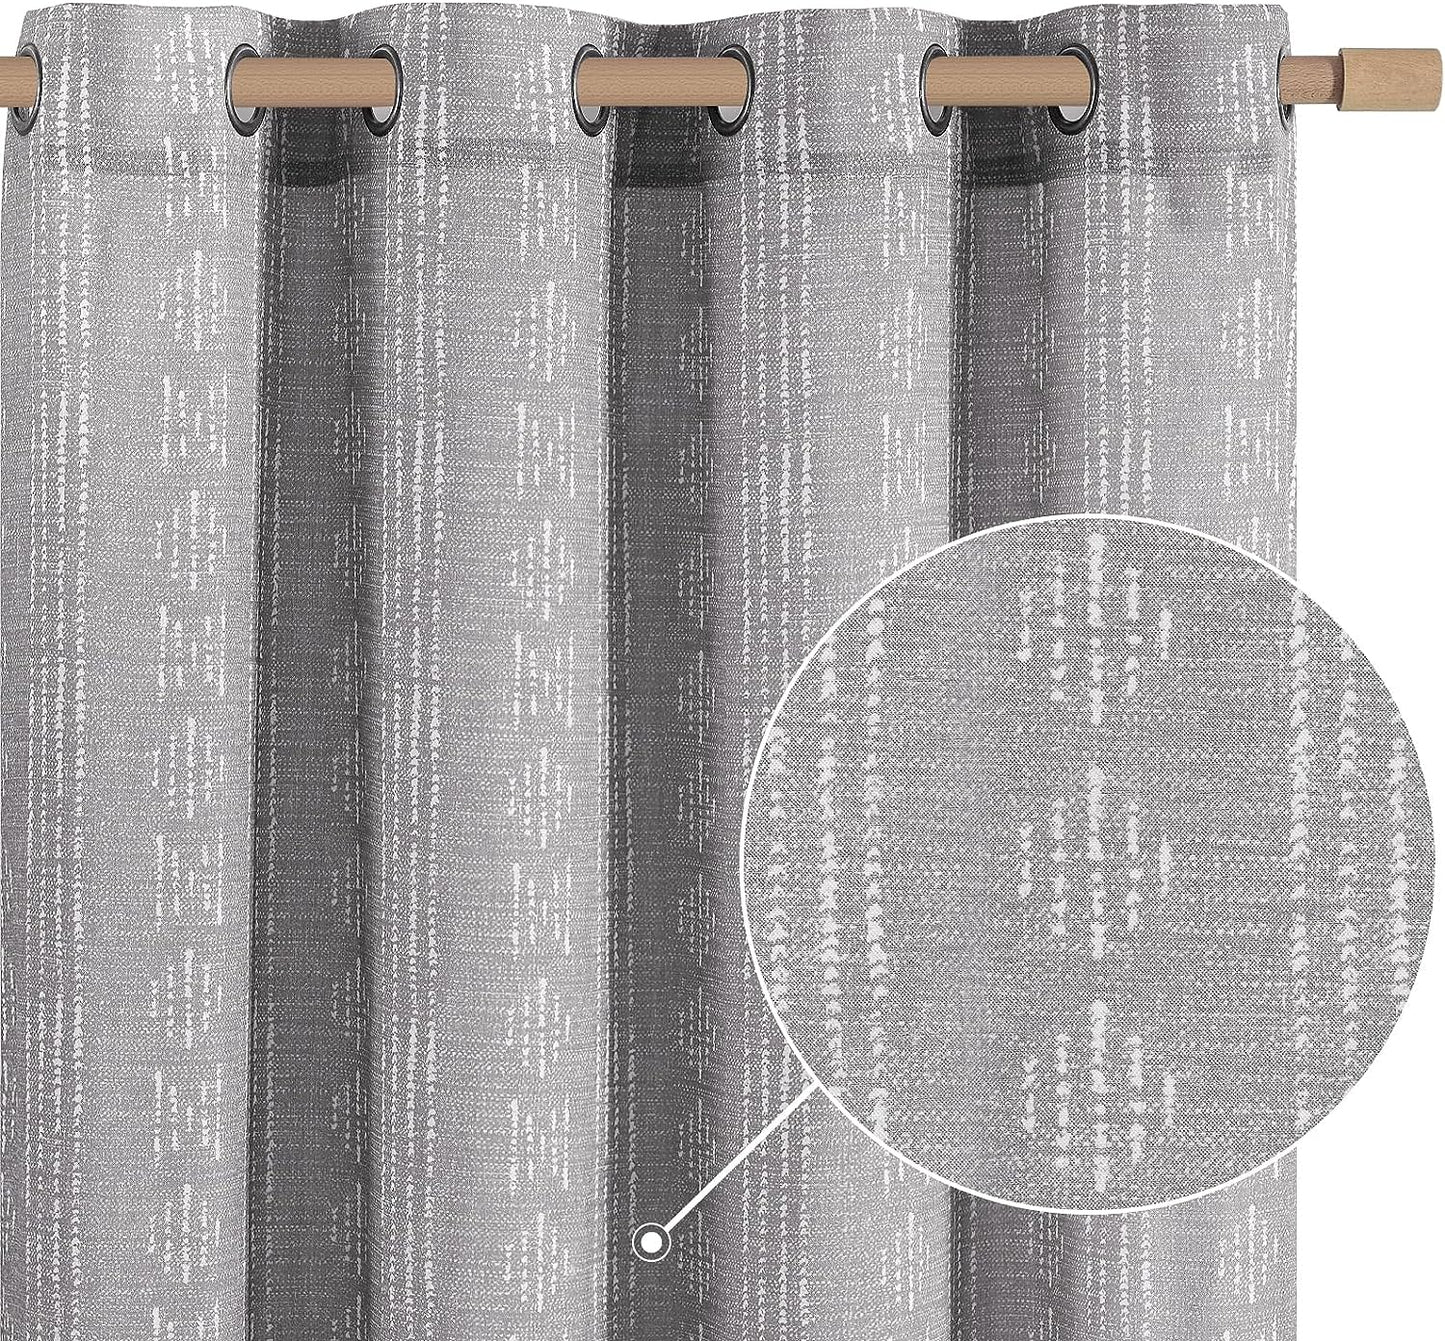 Jinchan Boho Curtains Linen Sliding Patio Door Curtains 84 Inches Long 1 Panel Divider Drapes Extra Wide Black Farmhouse Curtains for Living Room Geometric Striped Light Filtering Grommet Curtains  CKNY HOME FASHION Boho| Grey W52 X L63 